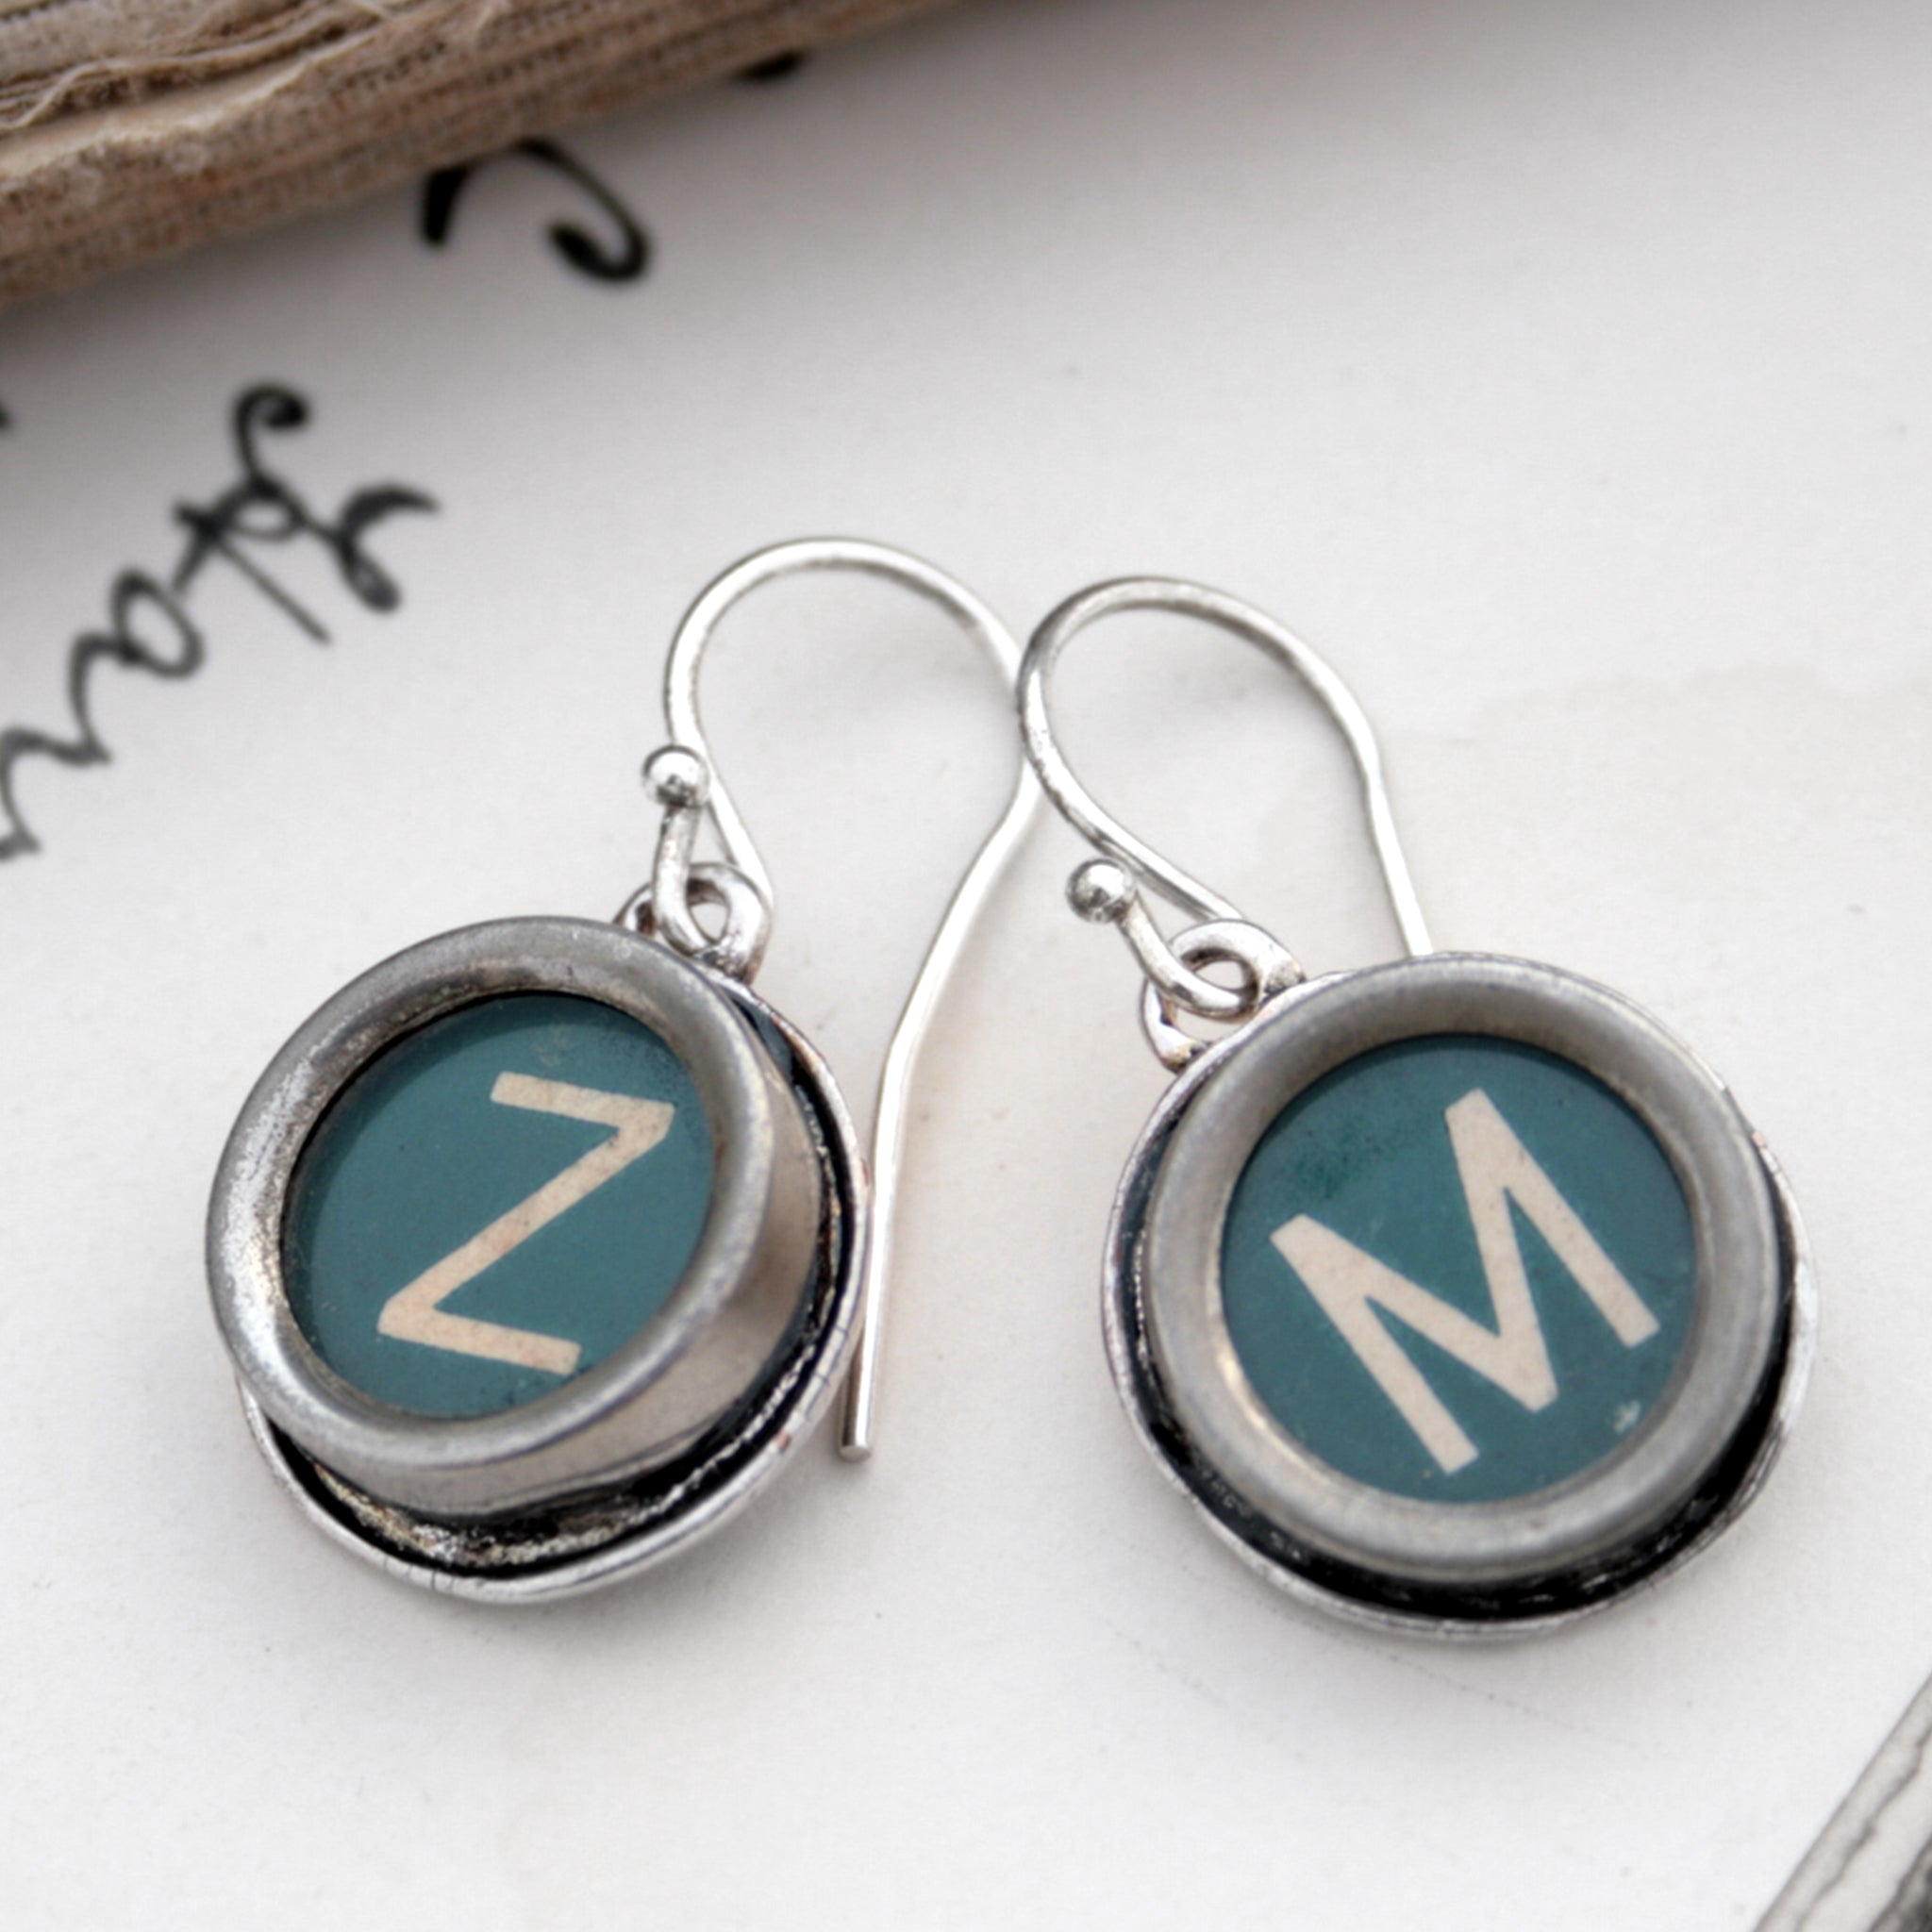  initial earrings made of authentic vintage typewriter keys Z and M in green color